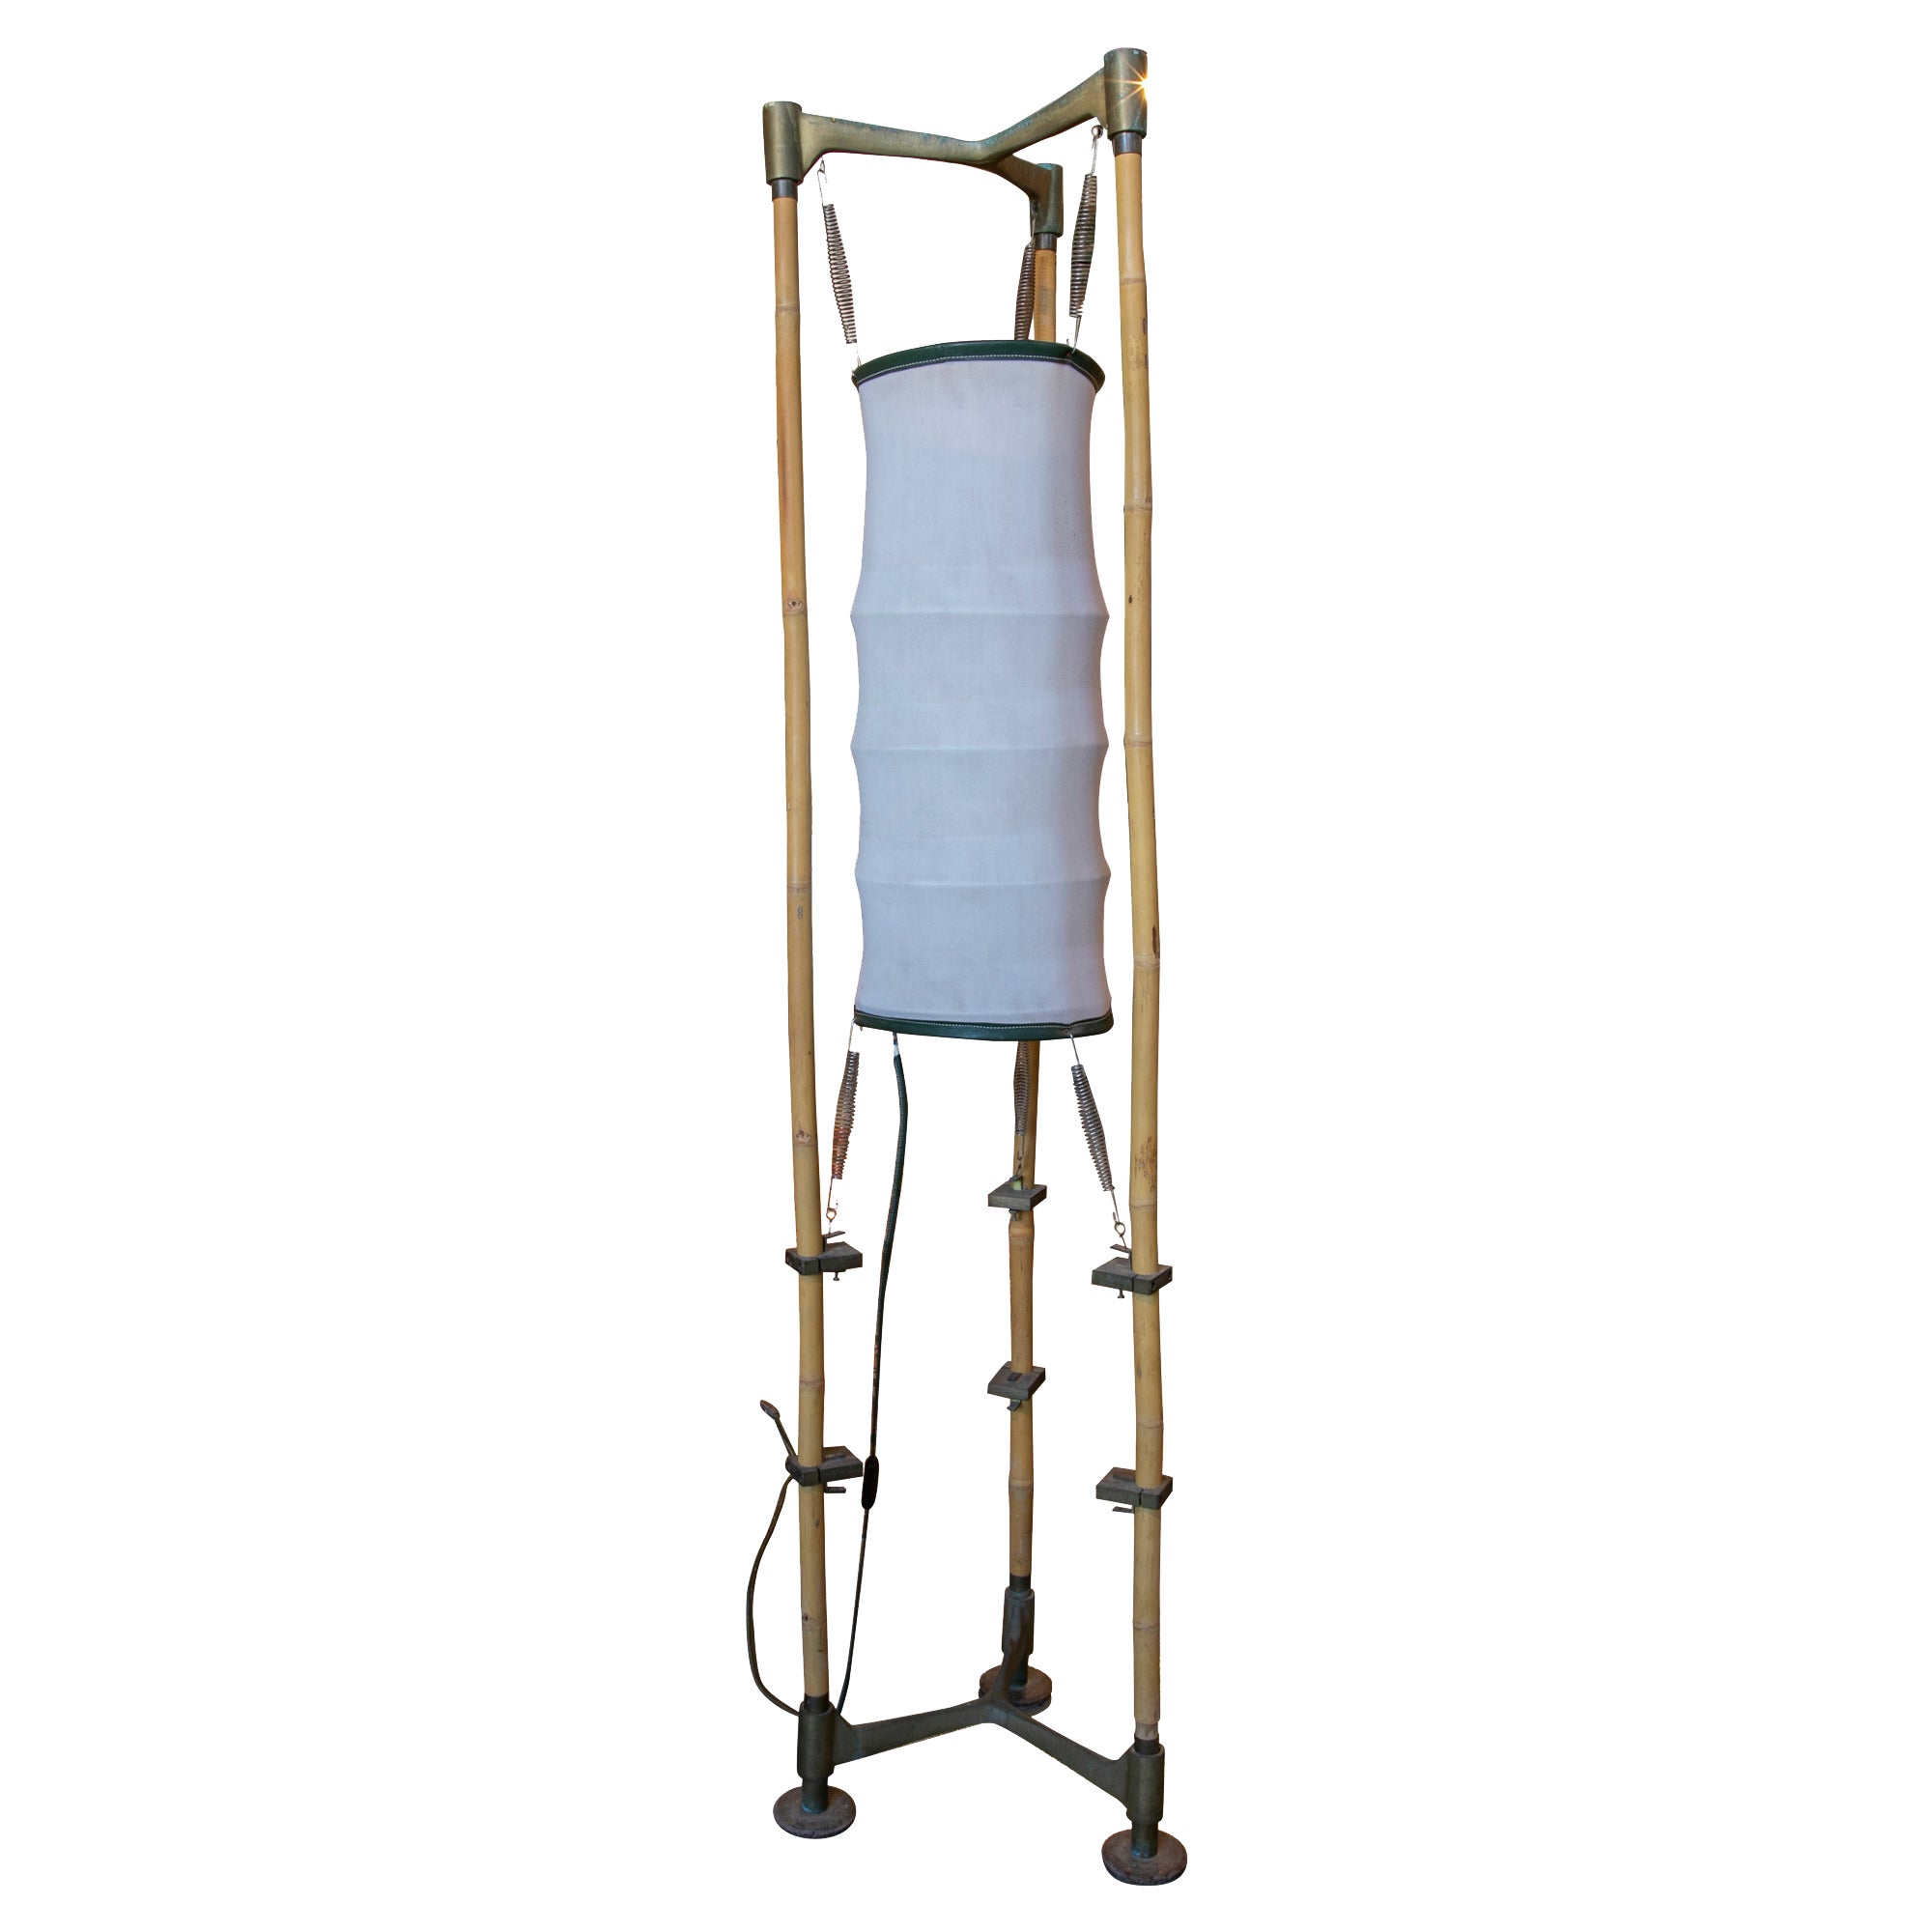 Floor Standing Lamp Made of Bamboo, Bronze Accessories and Fabric